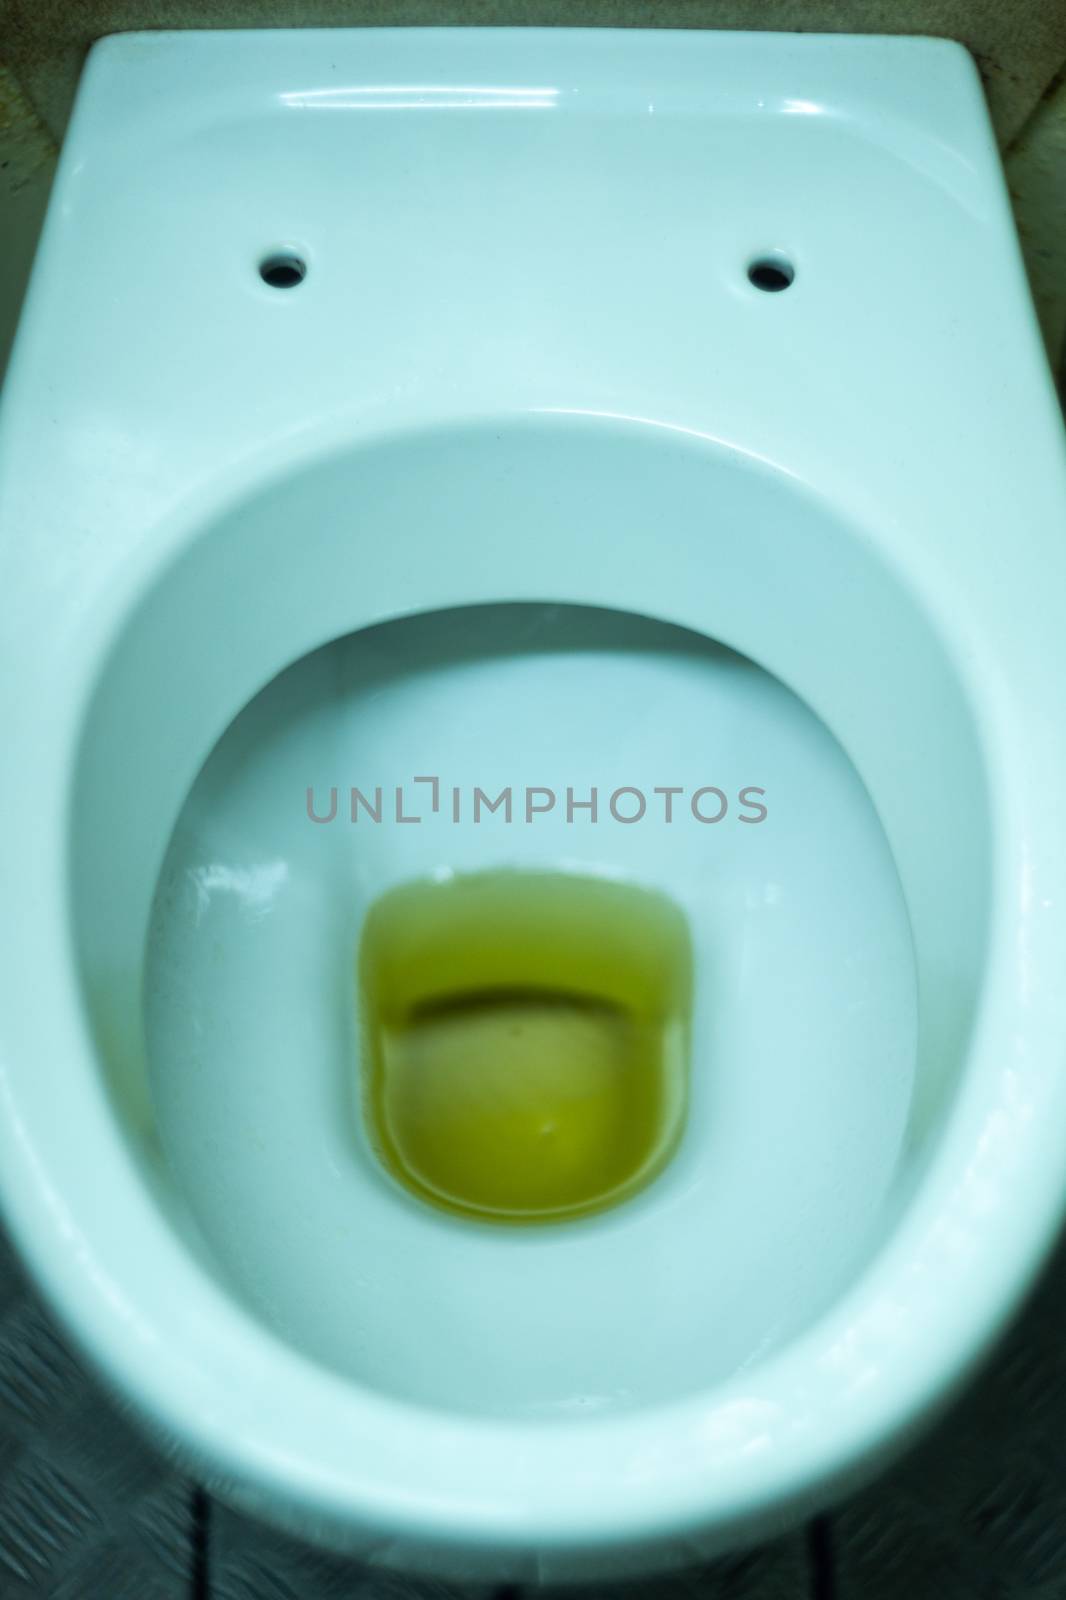 Dirty terrible toilet in a public toilet. Plating deteriorated from moisture and urine. Hue yellow urine in toilet, dirty floor.